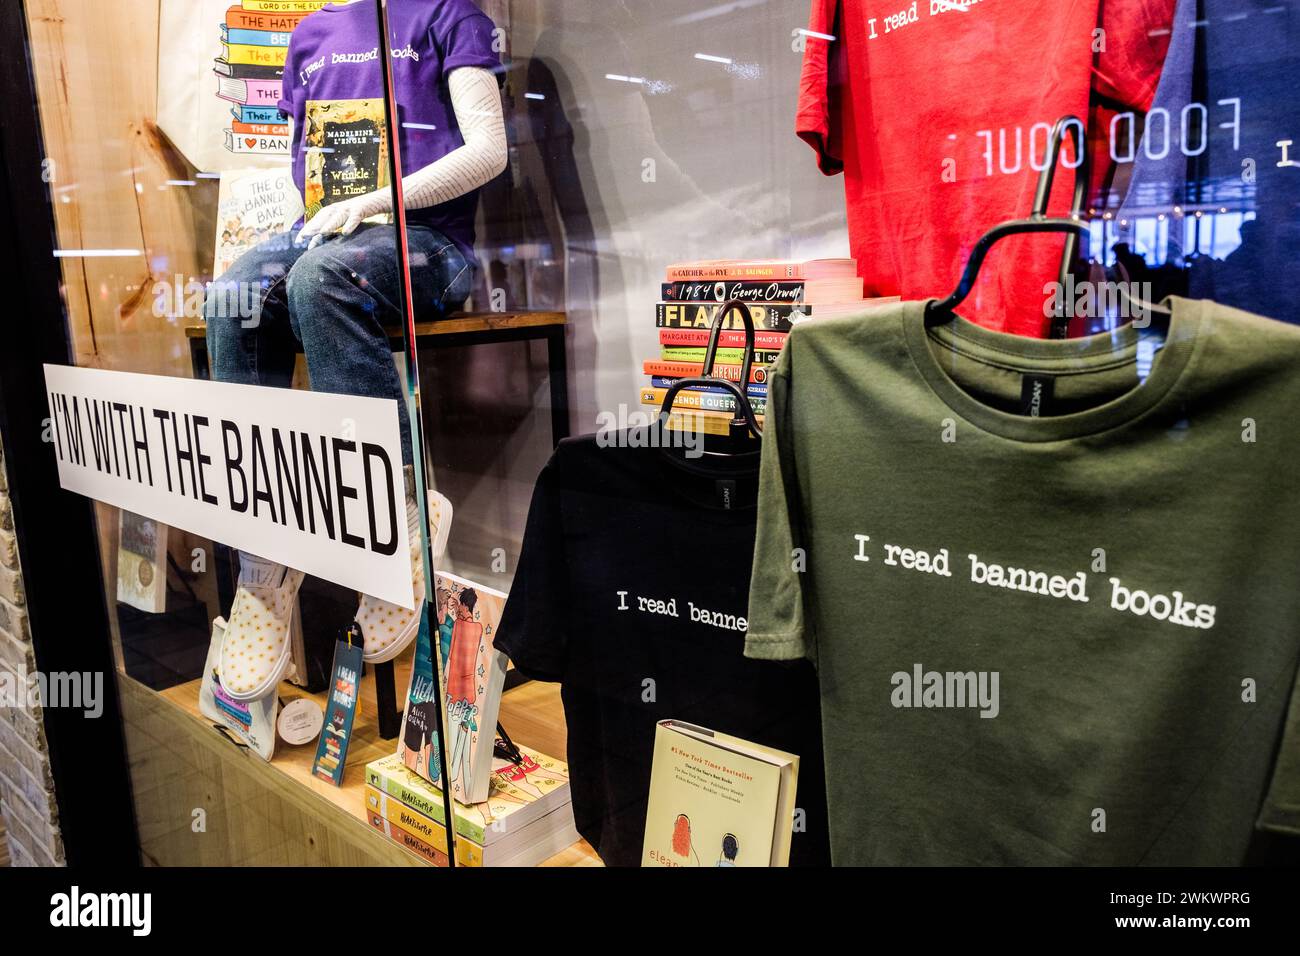 Display opposing the banning of books in the USA, at the Open Book bookstore in the Minneapolis-St. Paul International Airport (Minnesota). Stock Photo